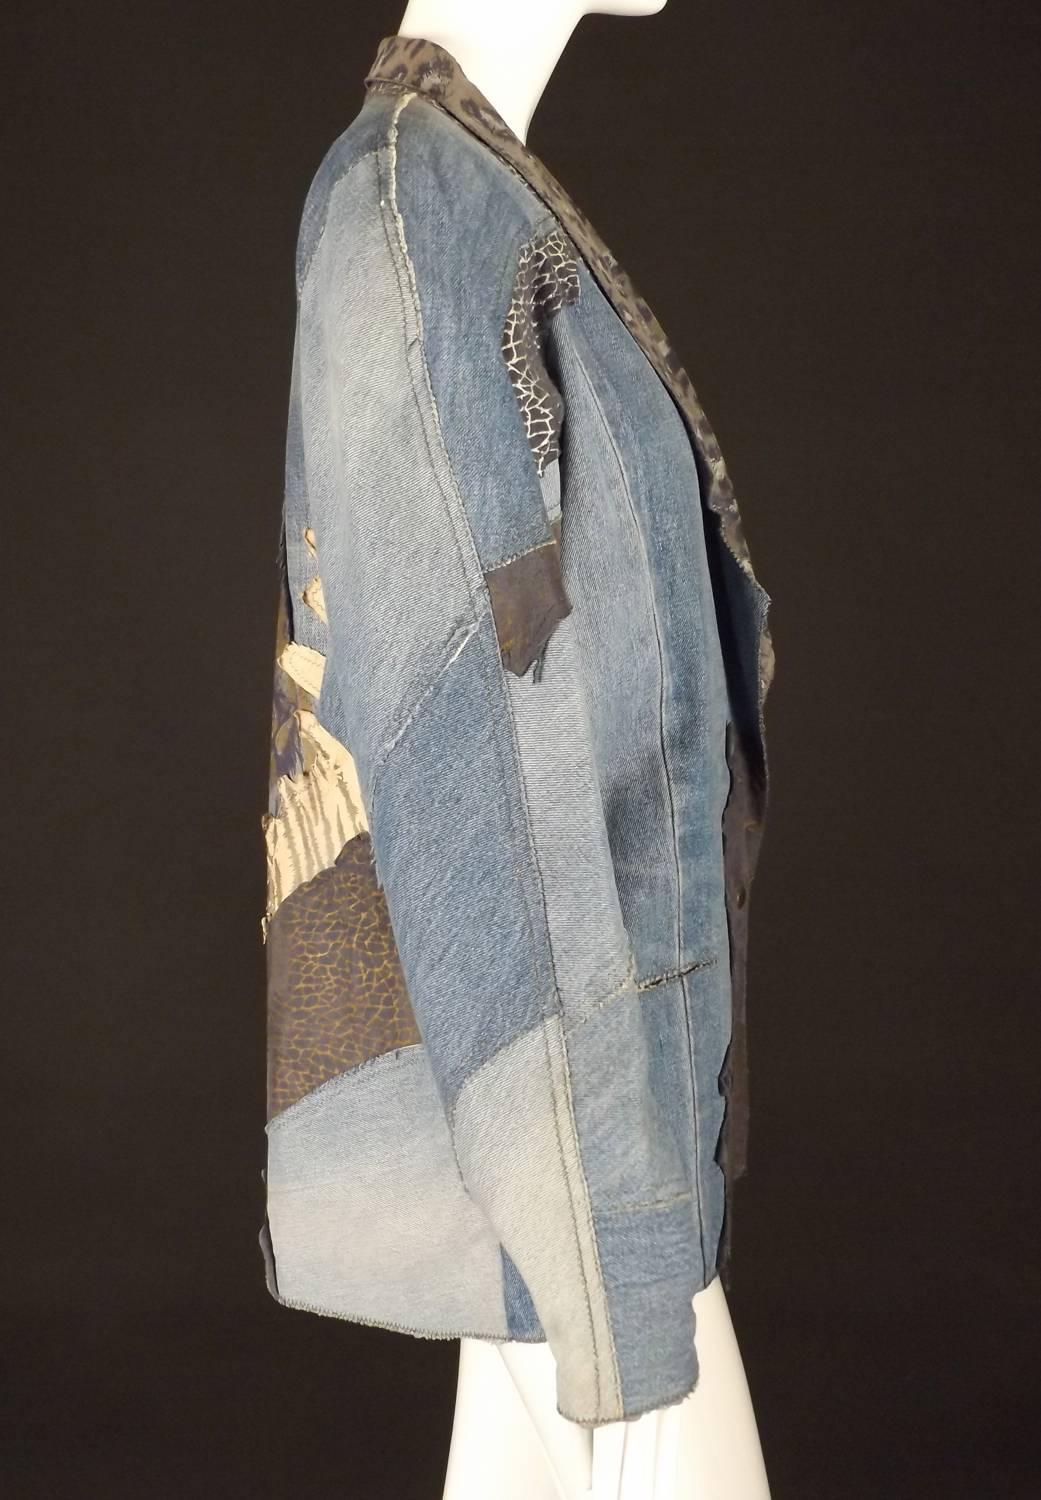 Awesome oversize 1980s stone wash jacket in blue denim and animal printed leather appliqués. The jacket has a shawl collar and notched lapels in leather.  V-shaped from the built up shoulder pads to the waist and hips. Inset pockets on the from